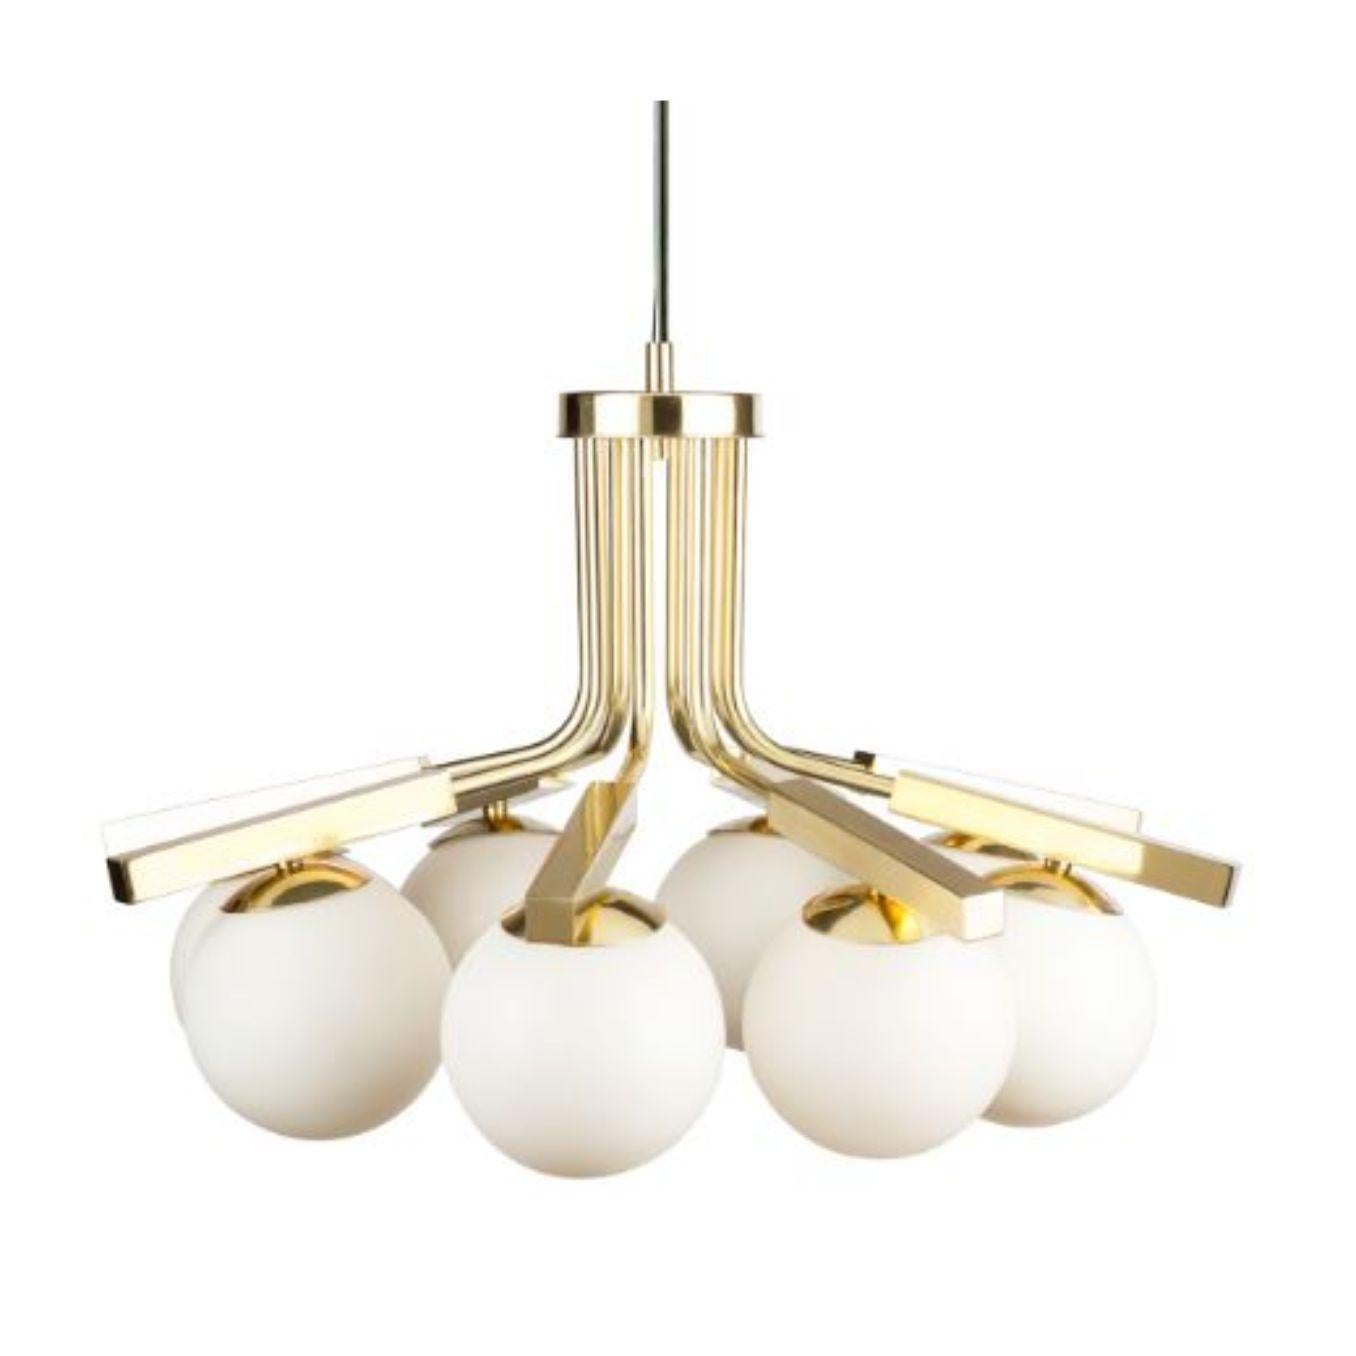 Brass Globe I Suspension lamp by Dooq
Dimensions: W 80 x D 80 x H 45 cm
Materials: lacquered metal, polished or brushed metal, brass.
Also available in different colors and materials. 

Information:
230V/50Hz
8 x max. G9
4W